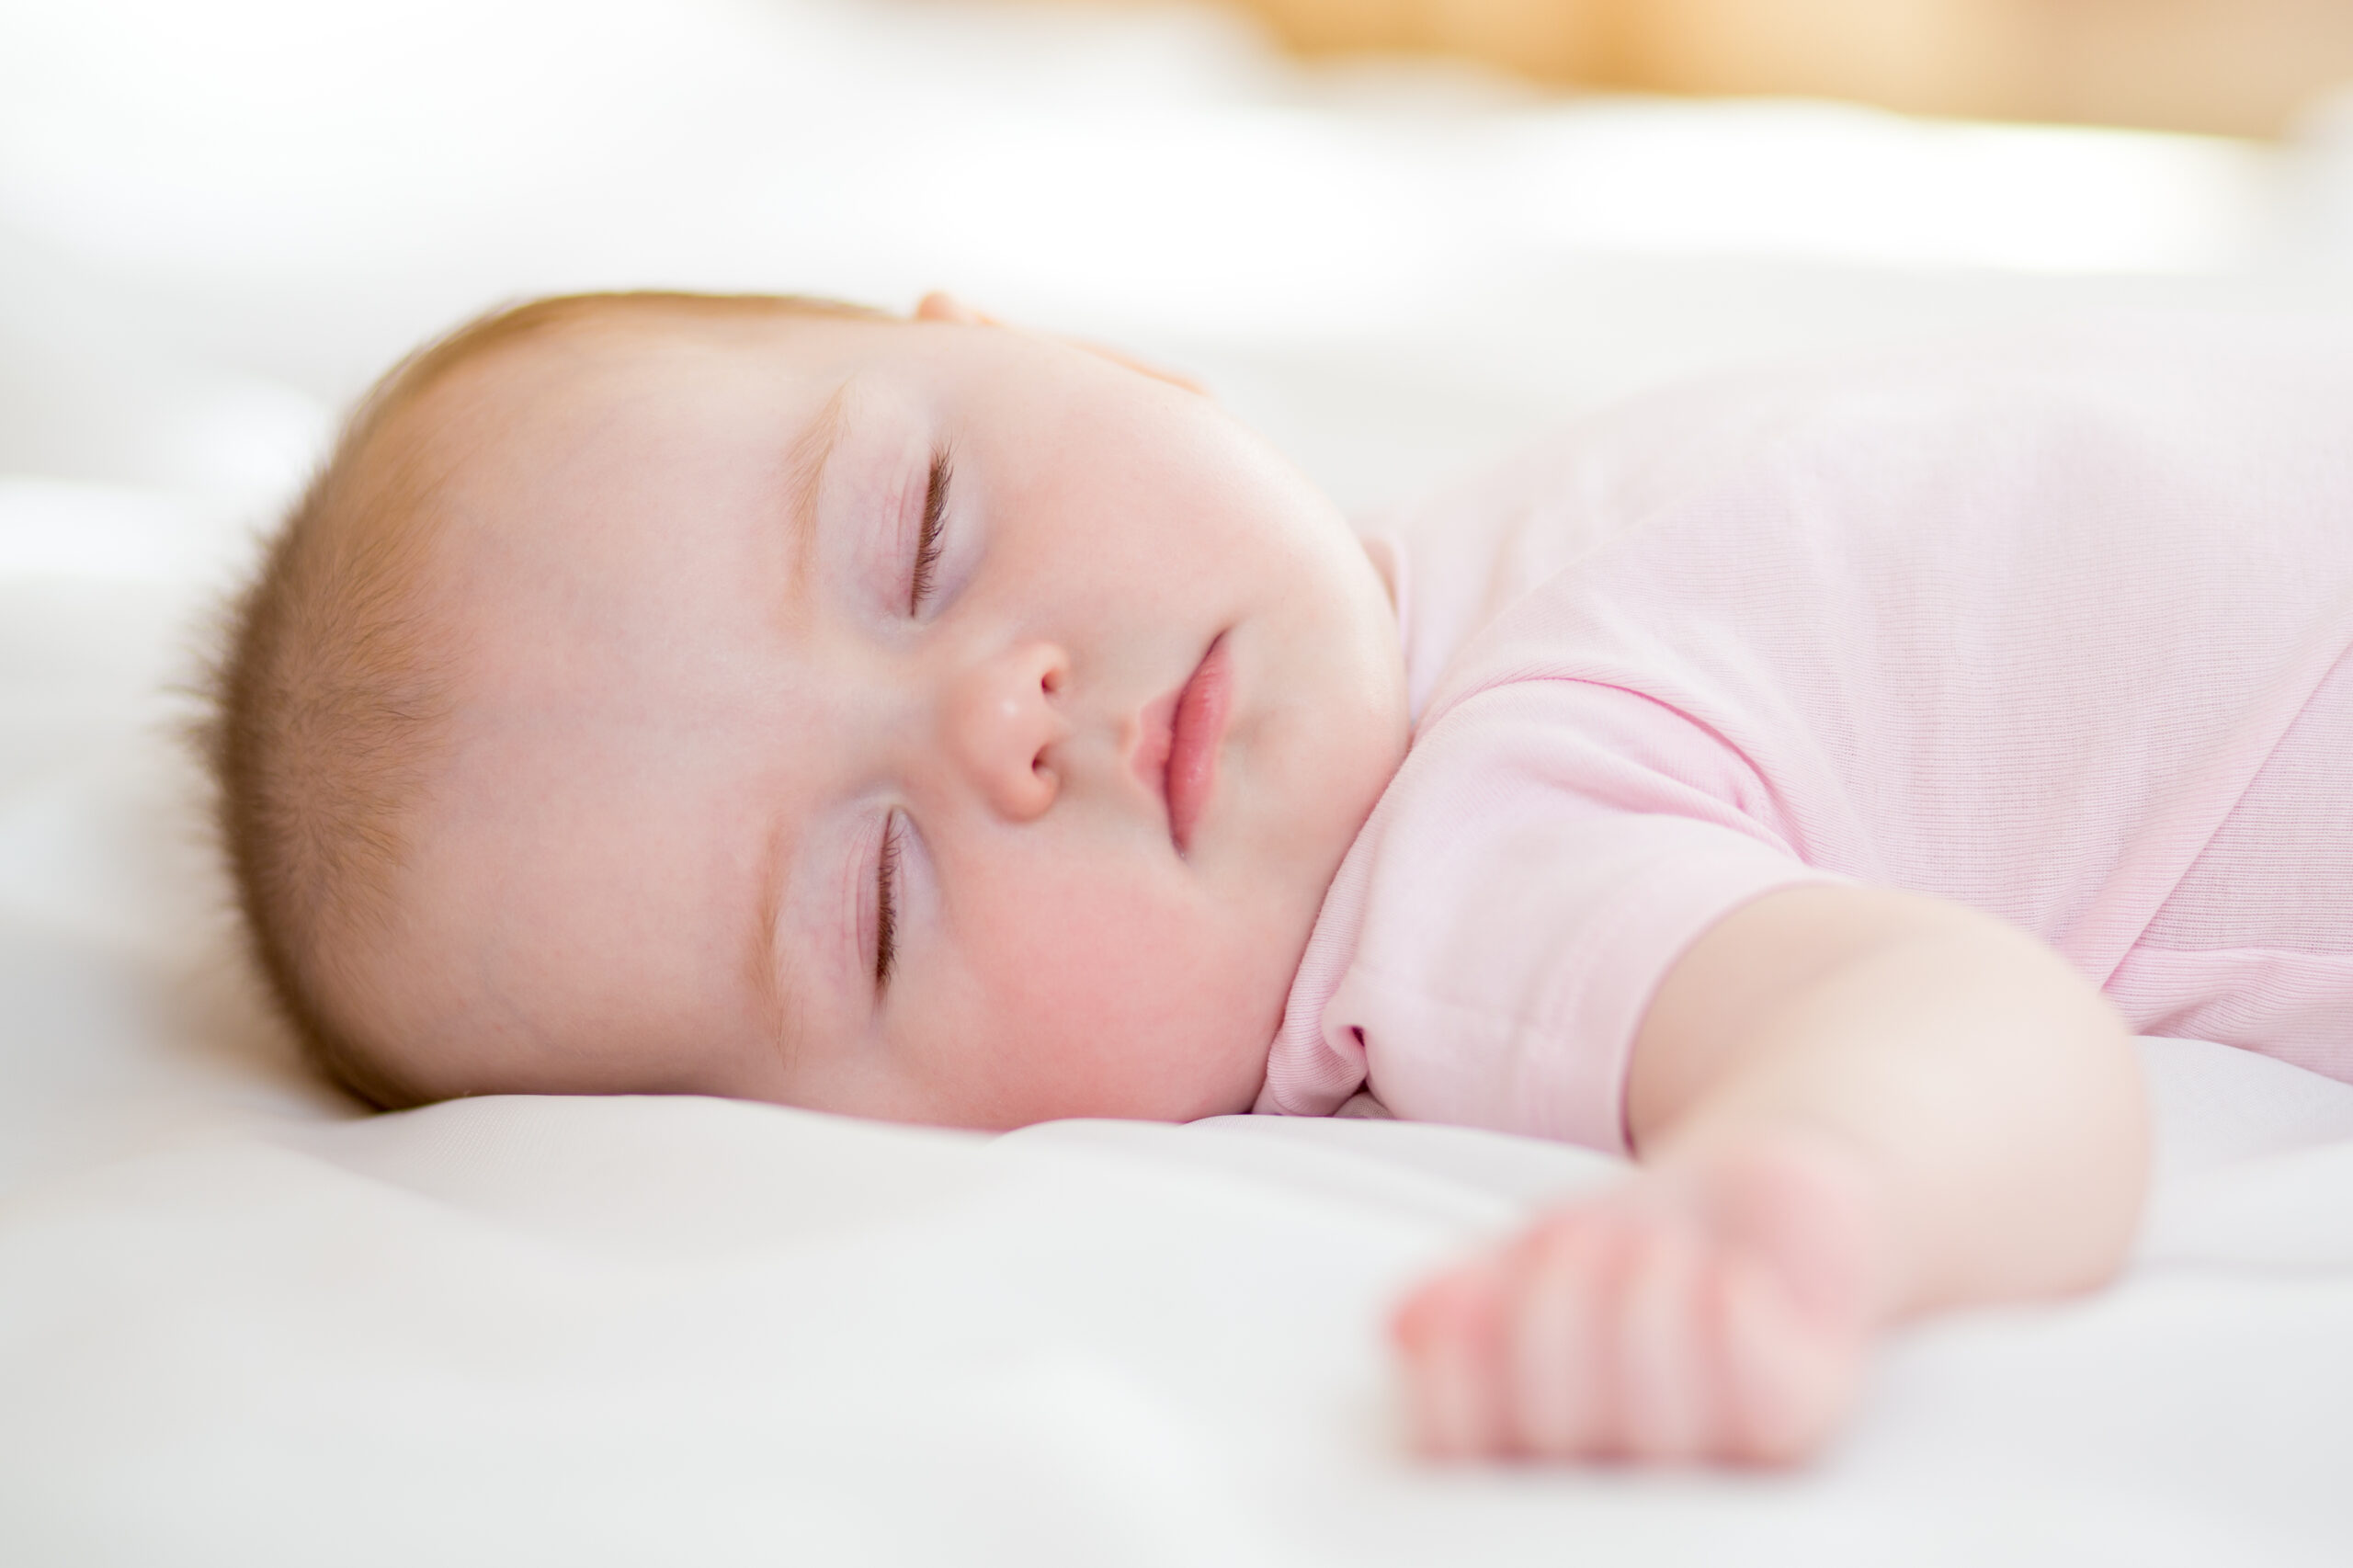 Is Your Baby Ready to Drop from 3 Naps per Day to 2?